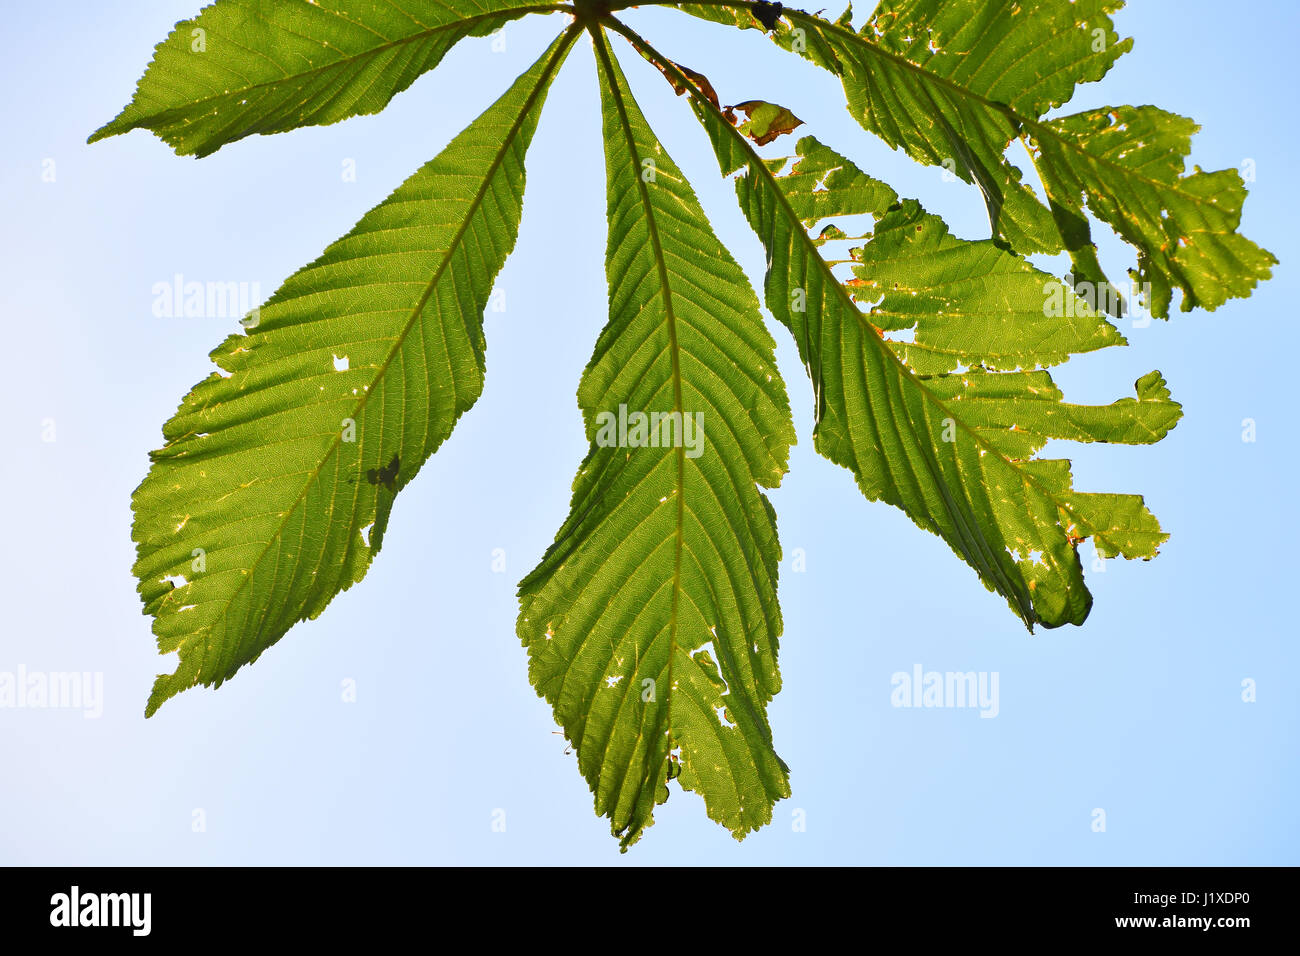 Green springtime horse chestnut (Aesculus hippocastanum) leaves damaged by diseases or insect pest, blast invaders, close up over clear blue sky Stock Photo